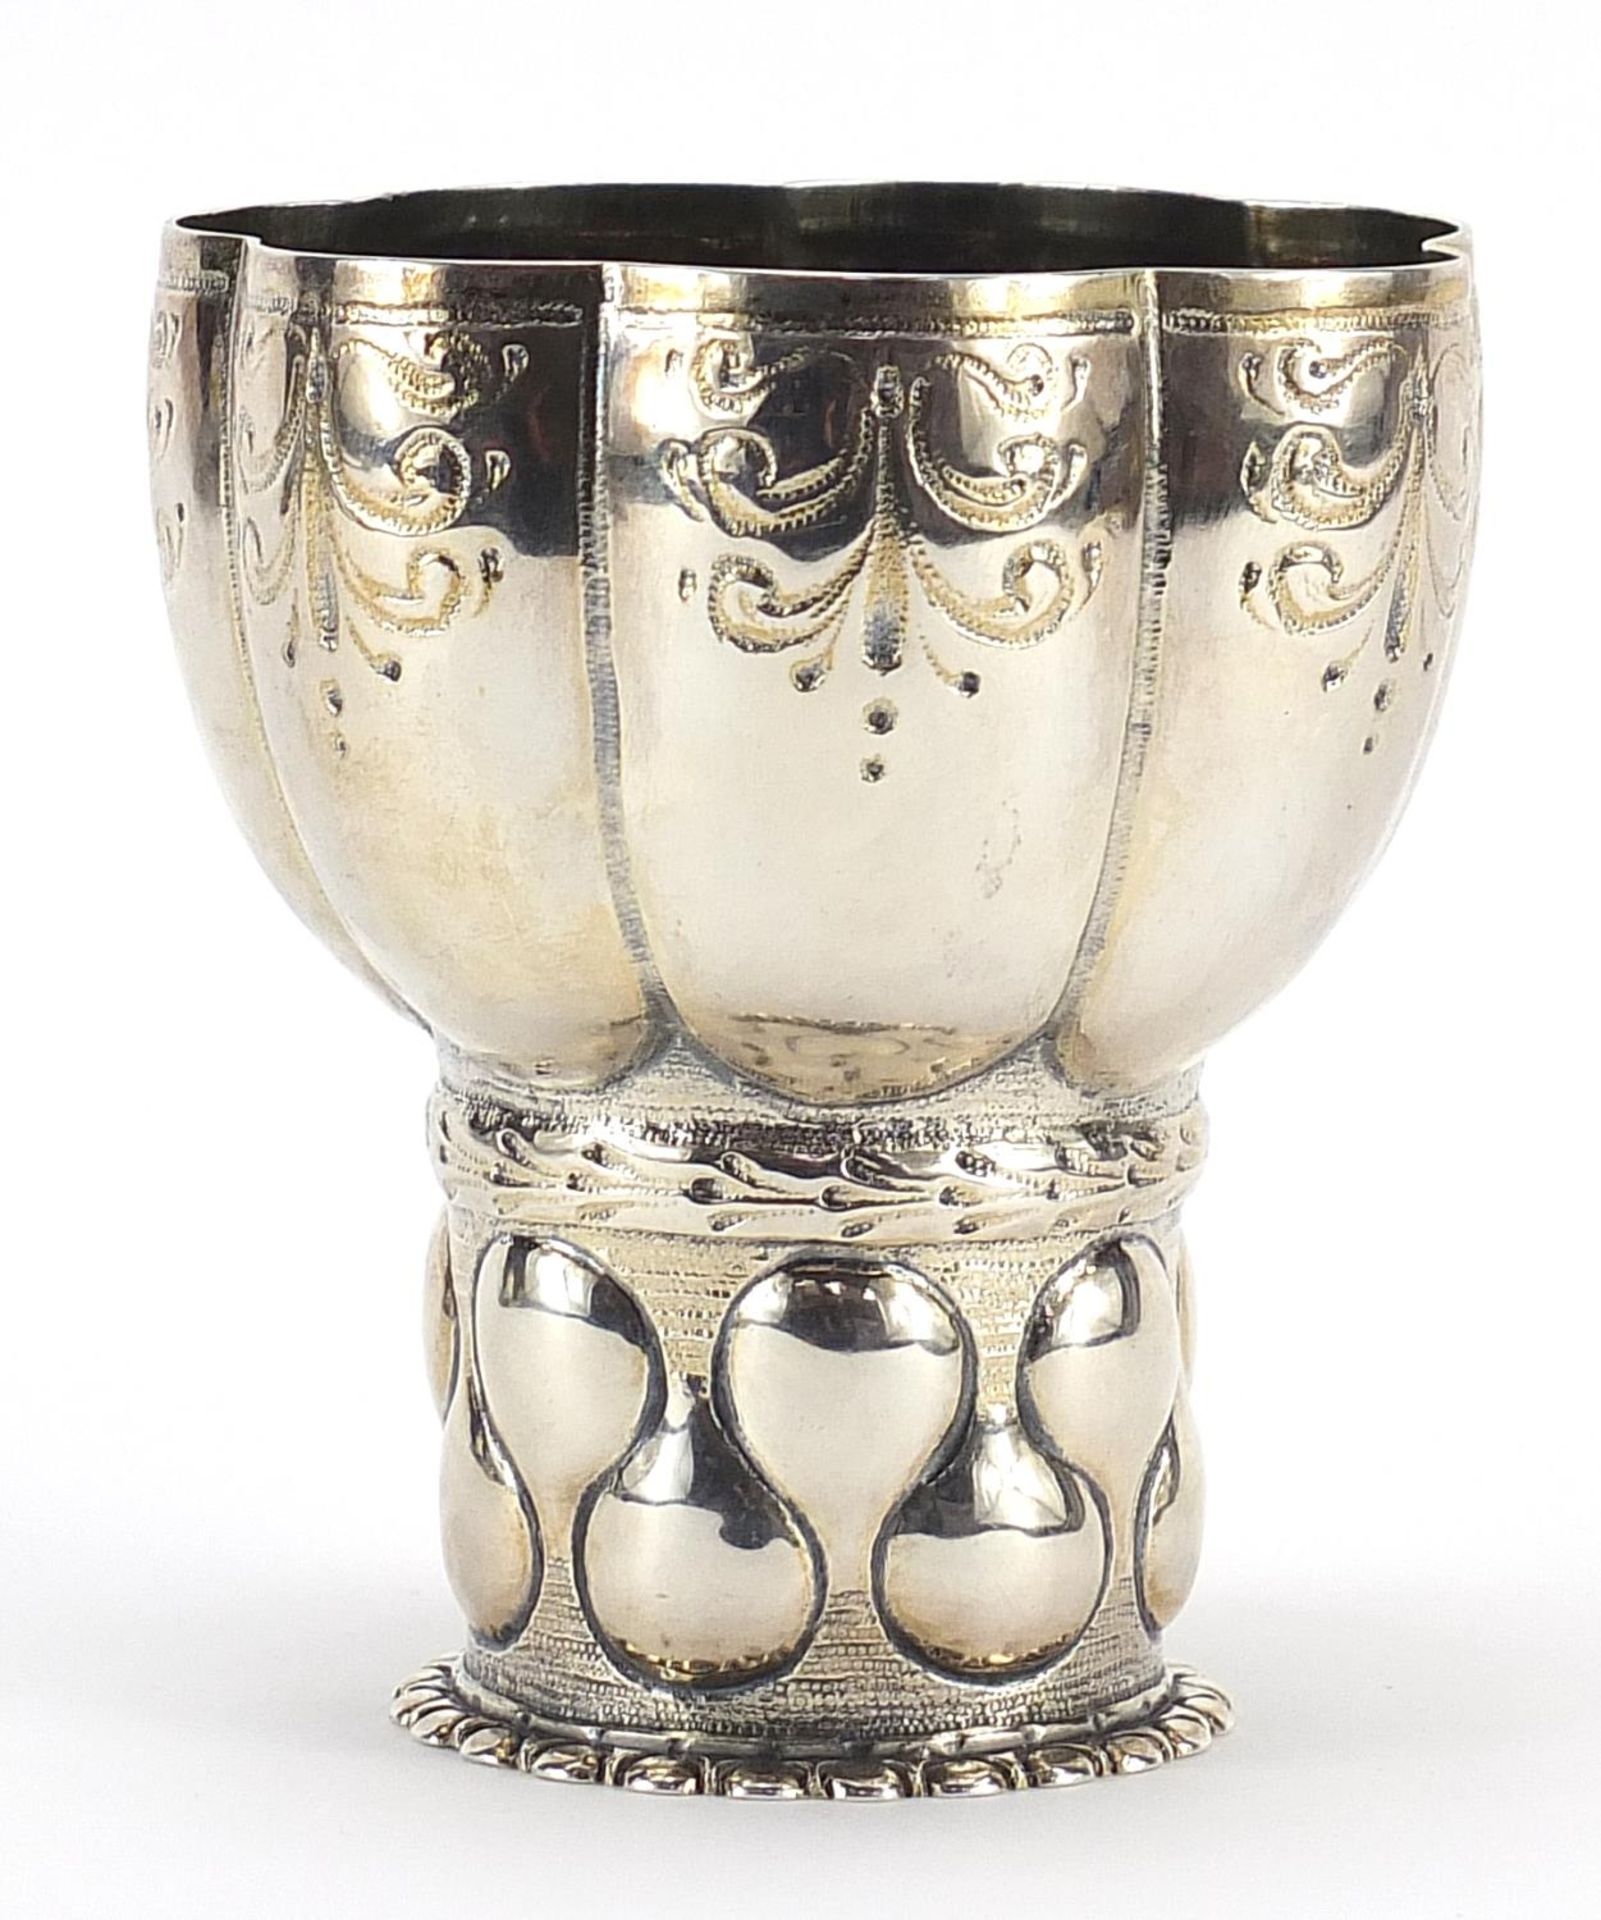 Victorian silver cup with engraved and embossed decoration, B & K and J. B marks London 1873, 9cm